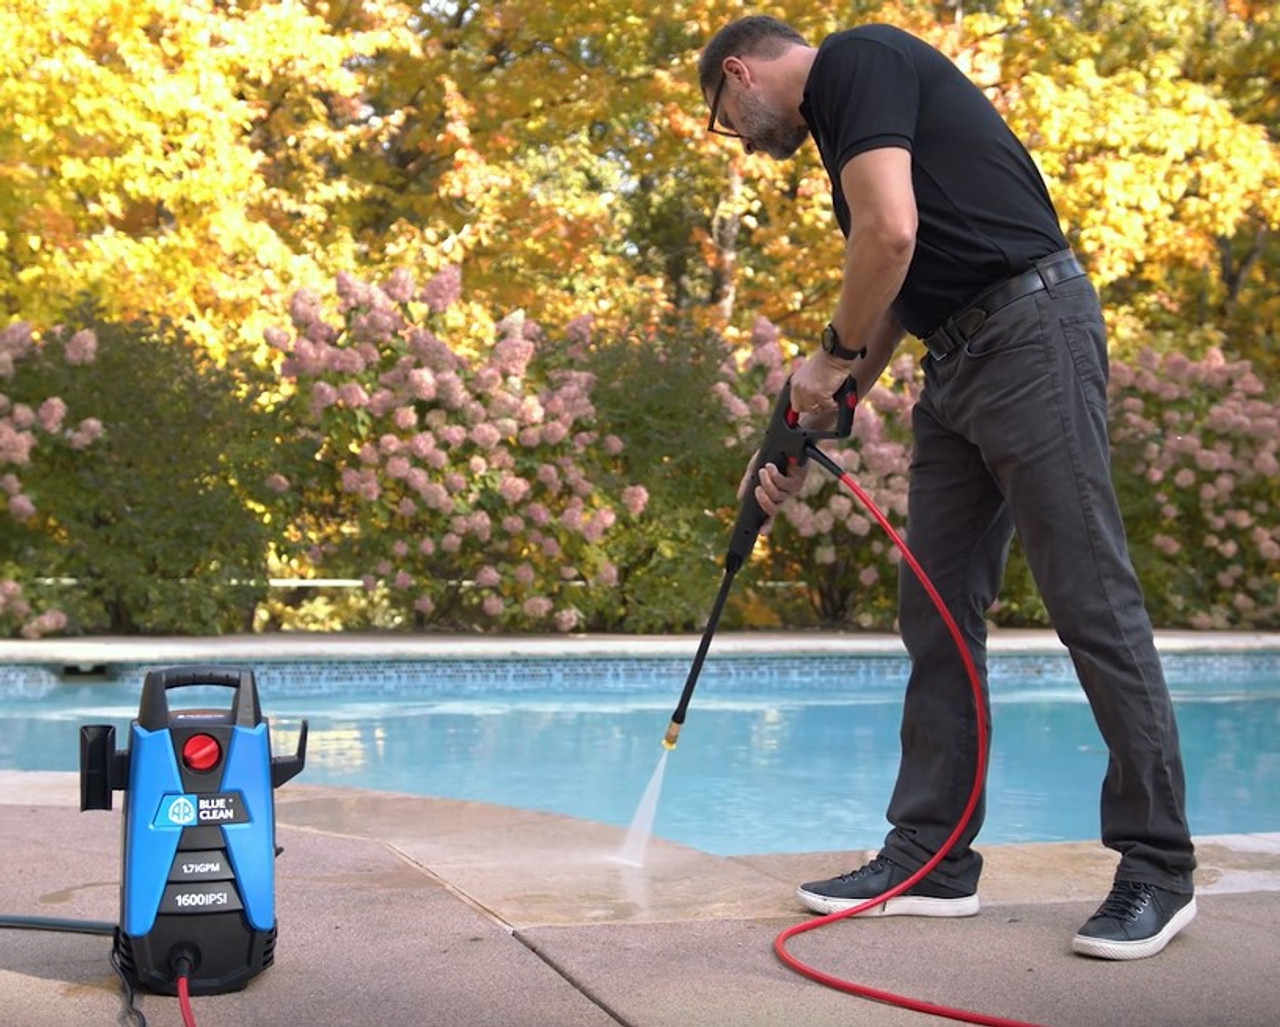 A-ITECH Electric Pressure Washer 1600 PSI High Power Washer 1.2 GPM with  Detergent Tank 4 Adjustable Quick Connect Nozzles 12 AMP High Pressure  Washer